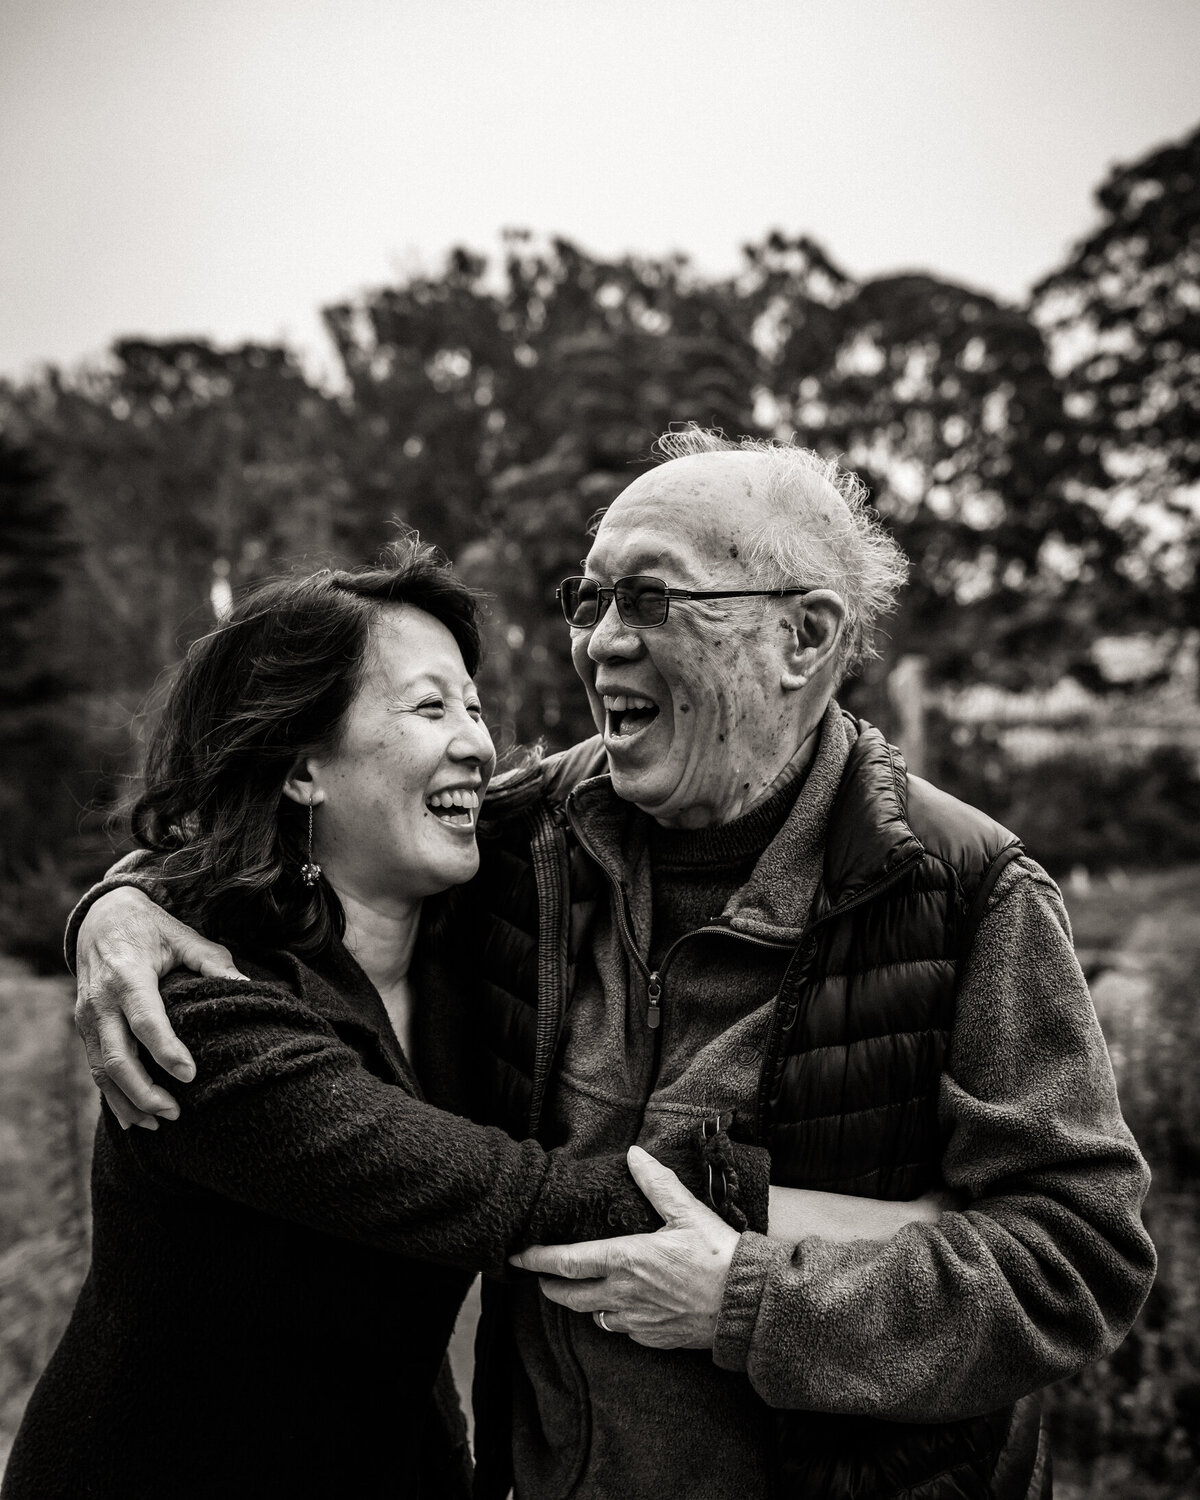 Laughing and embraced portrait of elderly father and daughter